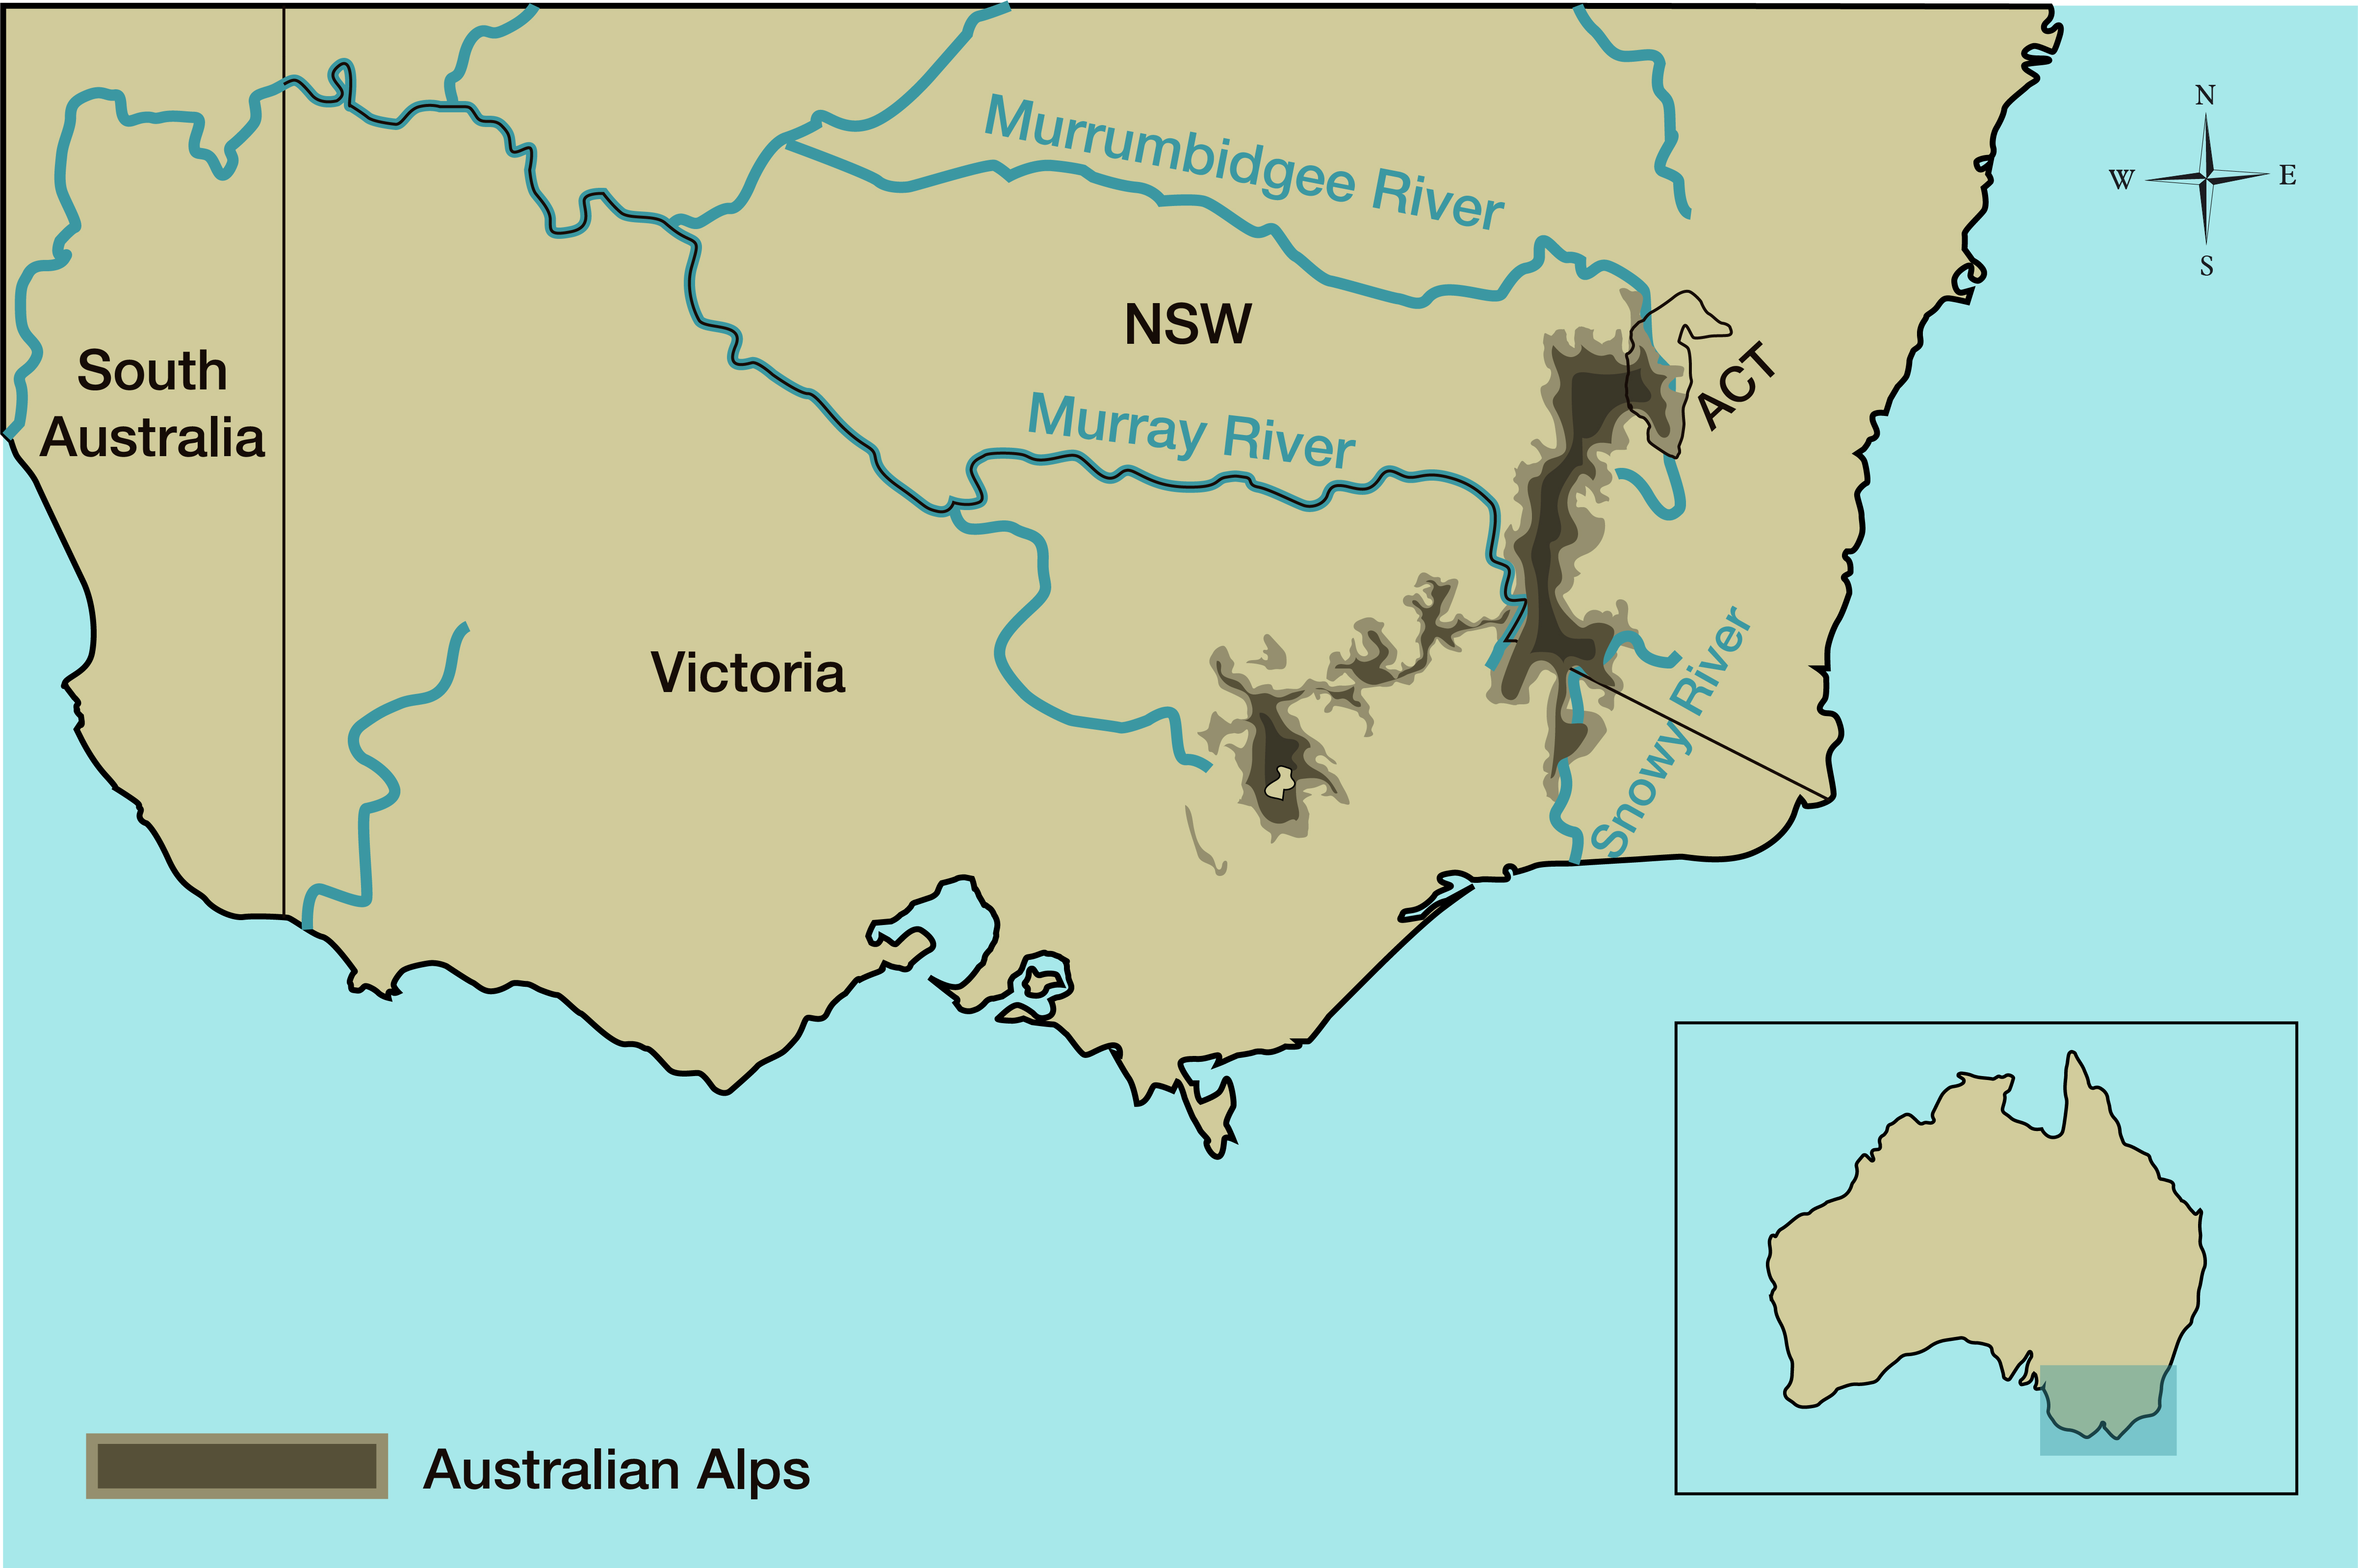 <p>Map showing the Australian Alps and major rivers in south-east Australia</p>
